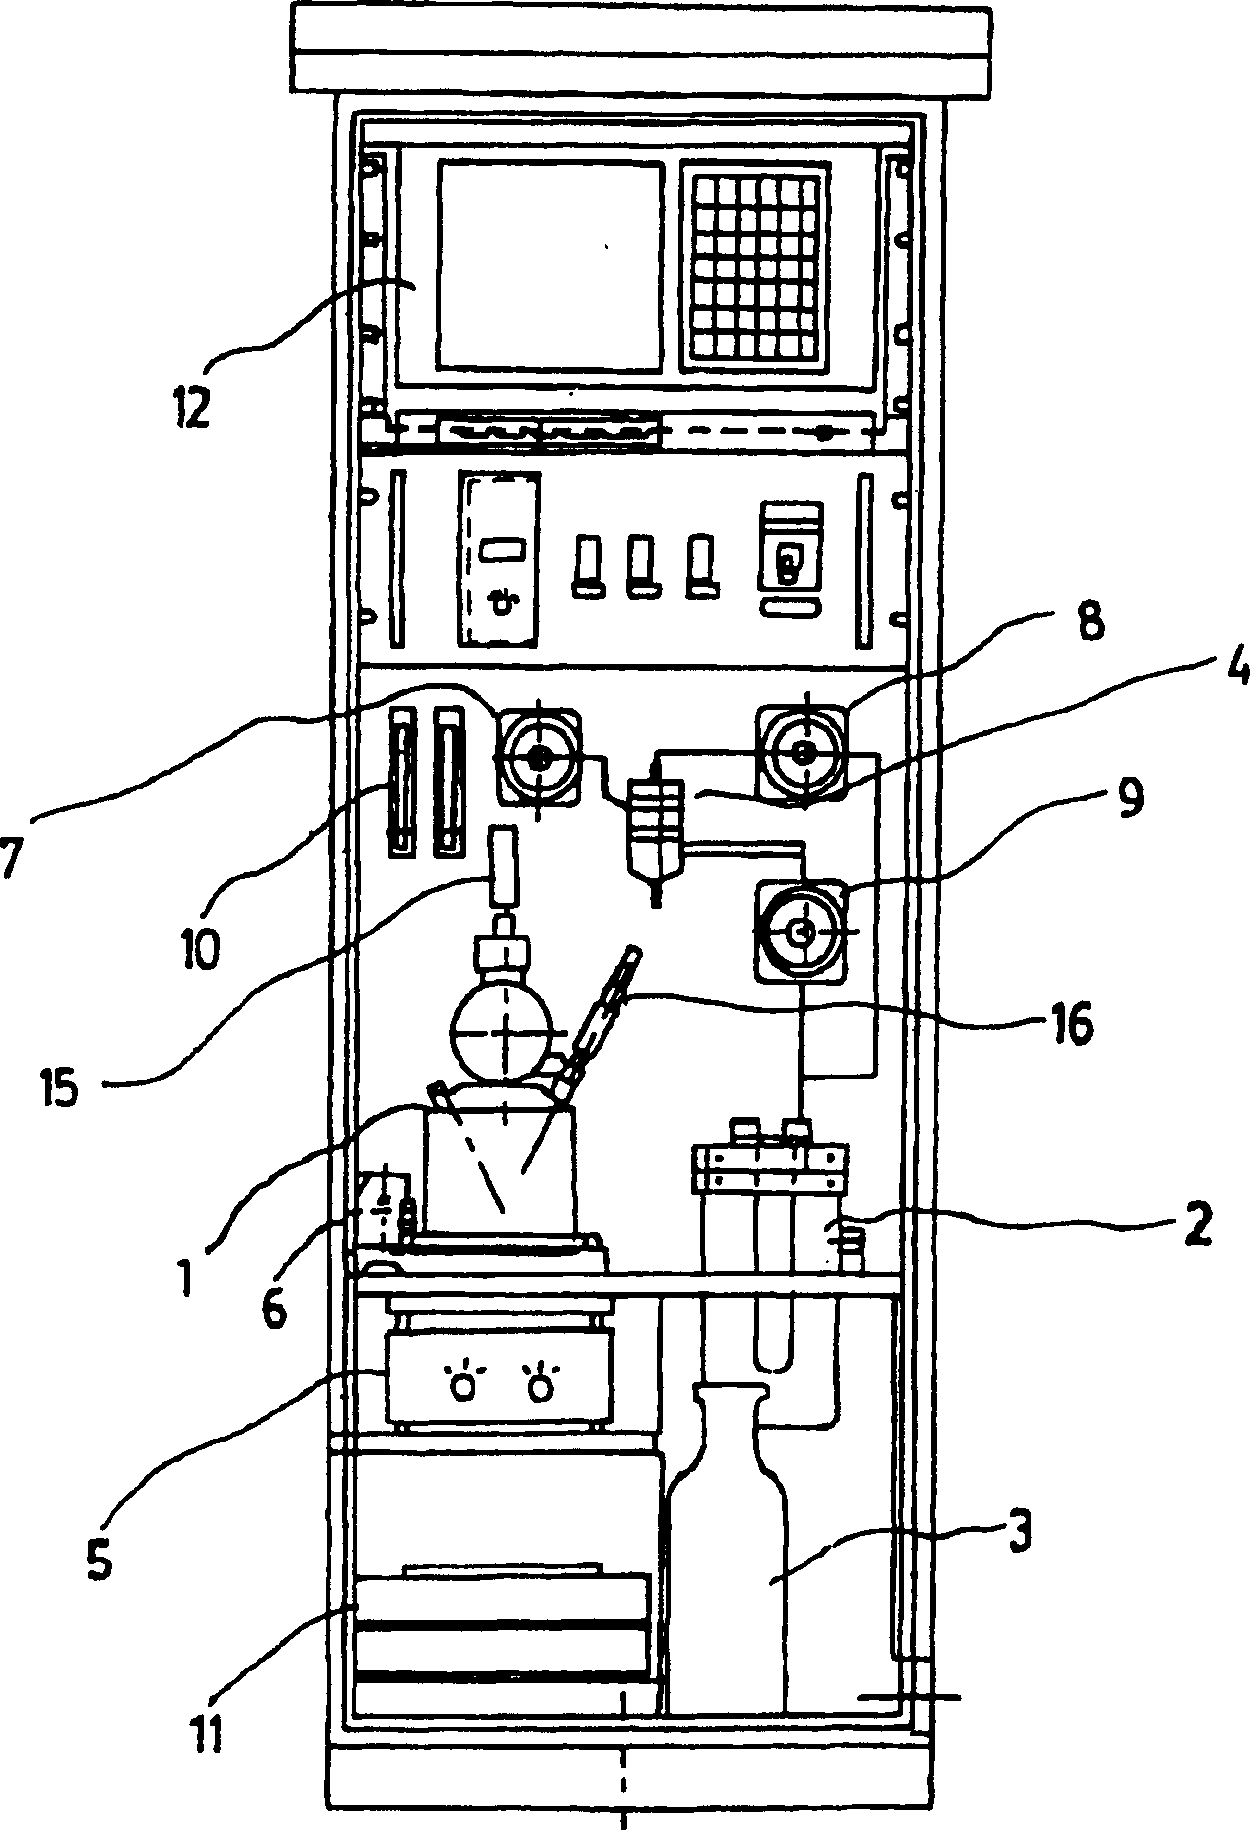 Method and device for continuously and quickly measuring biochemical oxygen demond